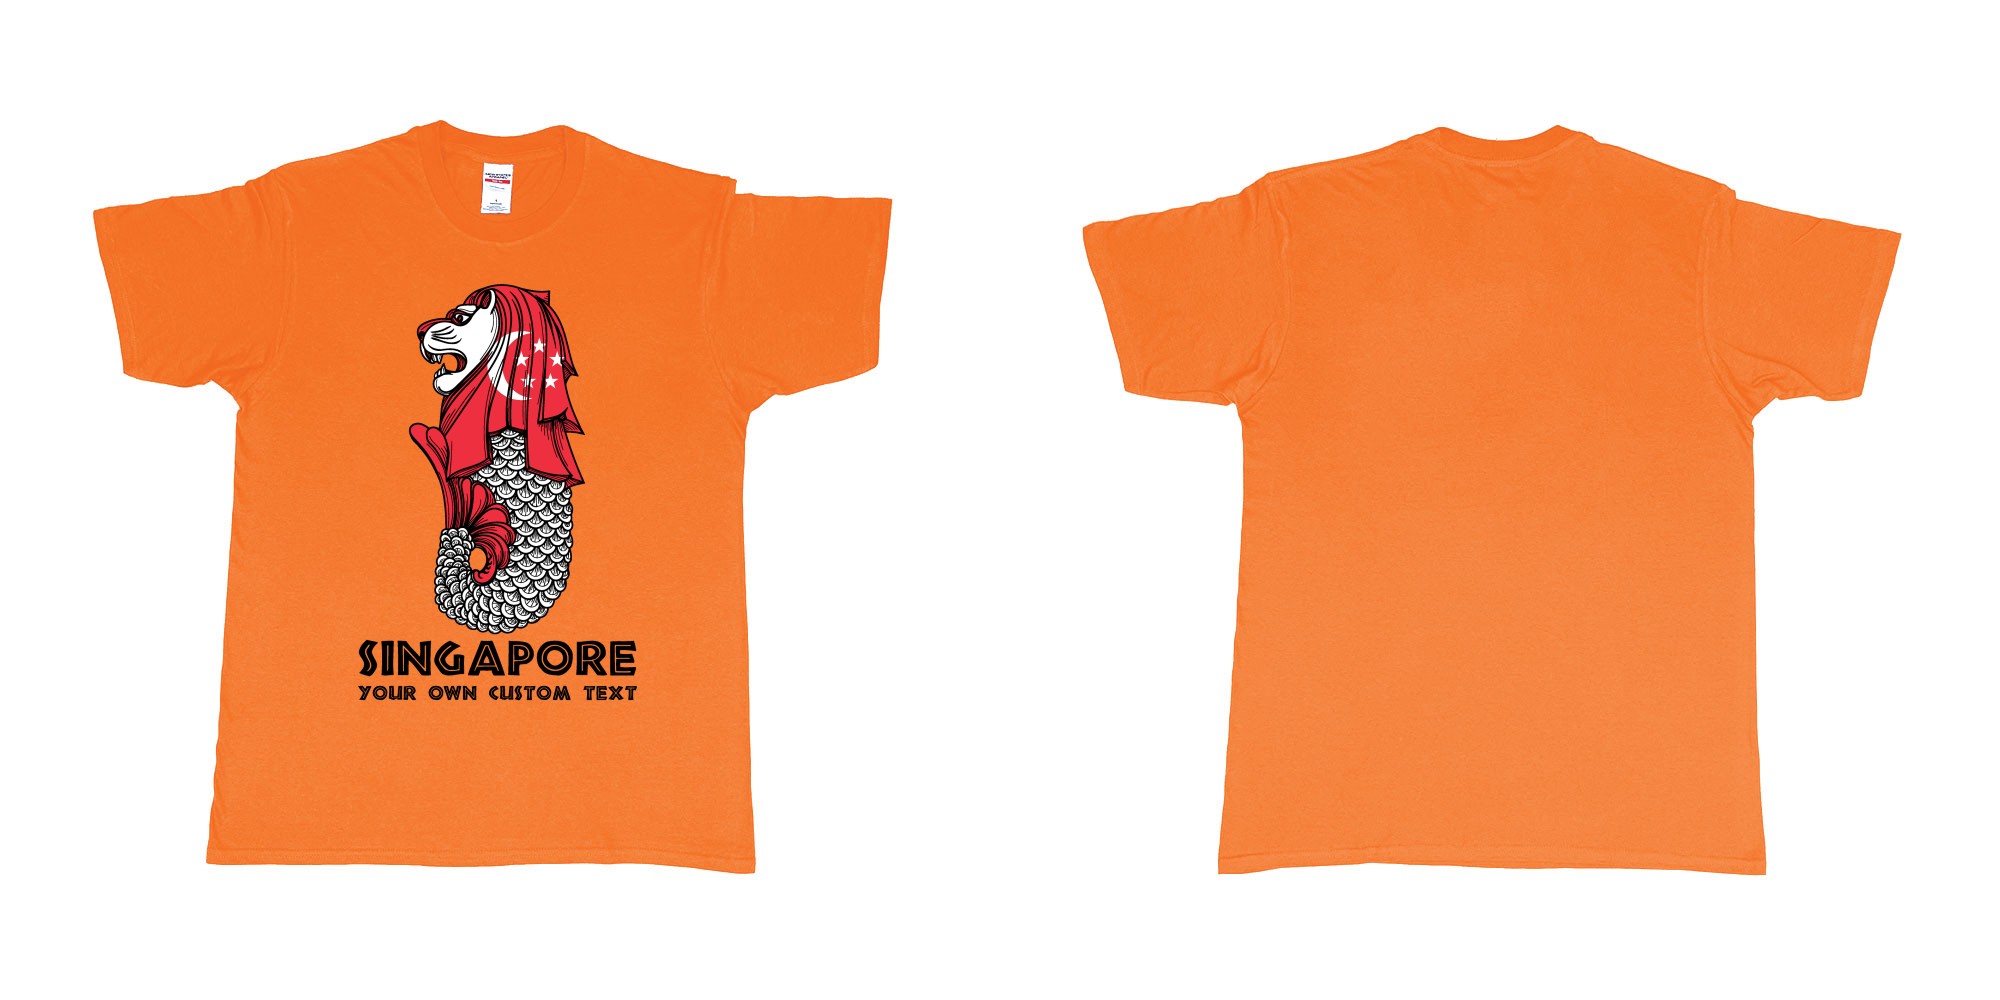 Custom tshirt design merlion singapore mascot statue lion in fabric color orange choice your own text made in Bali by The Pirate Way